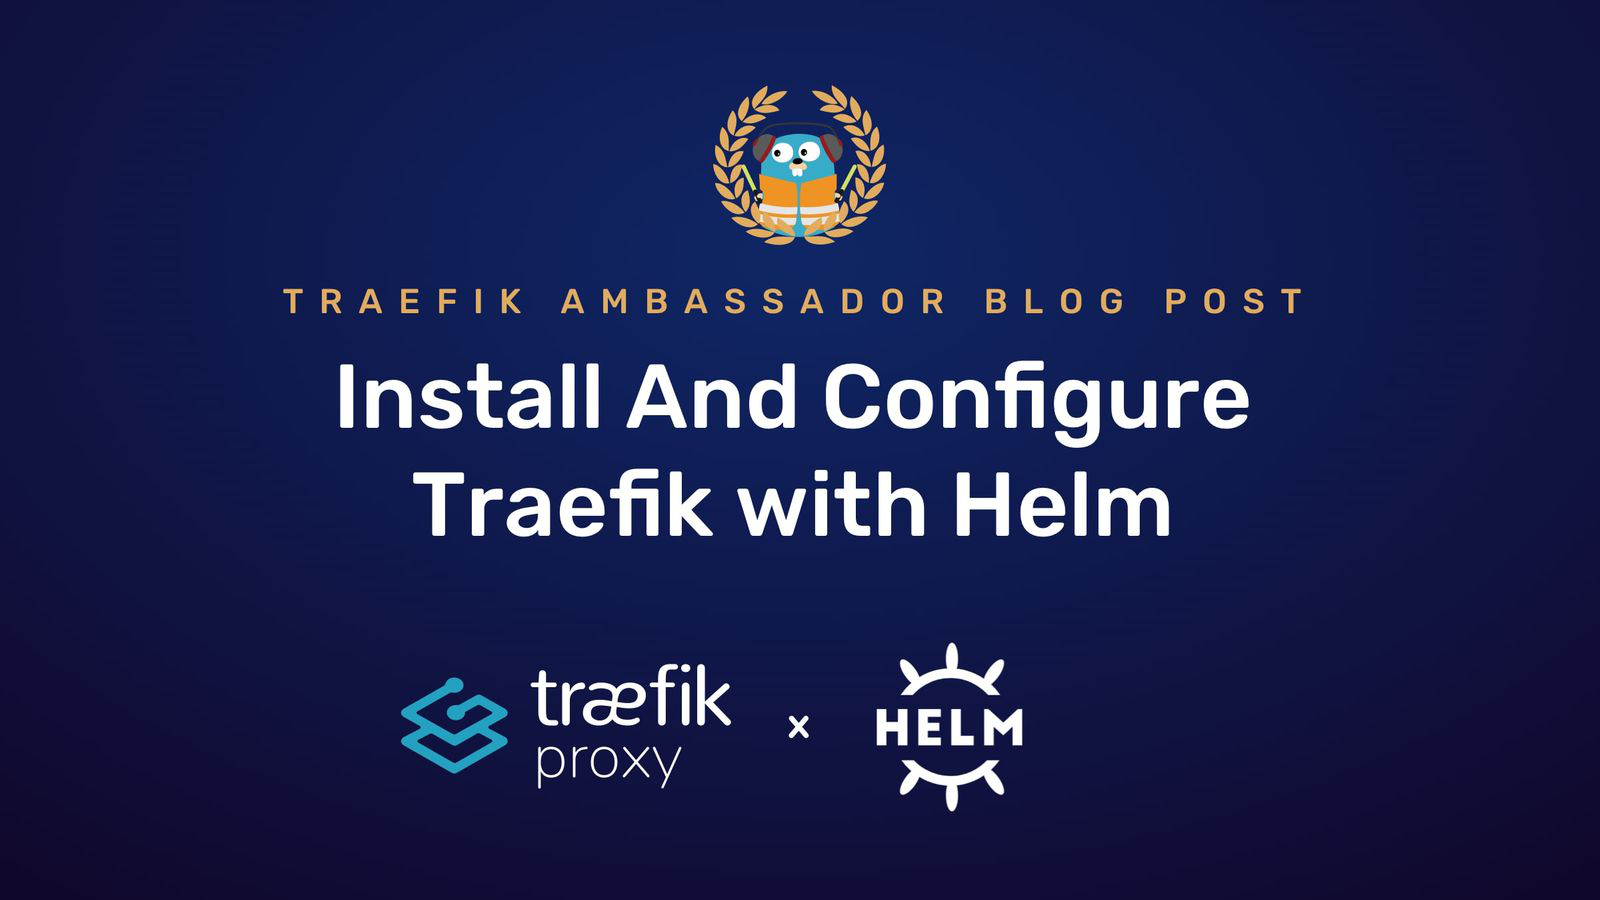 Install and configure Traefik with Helm